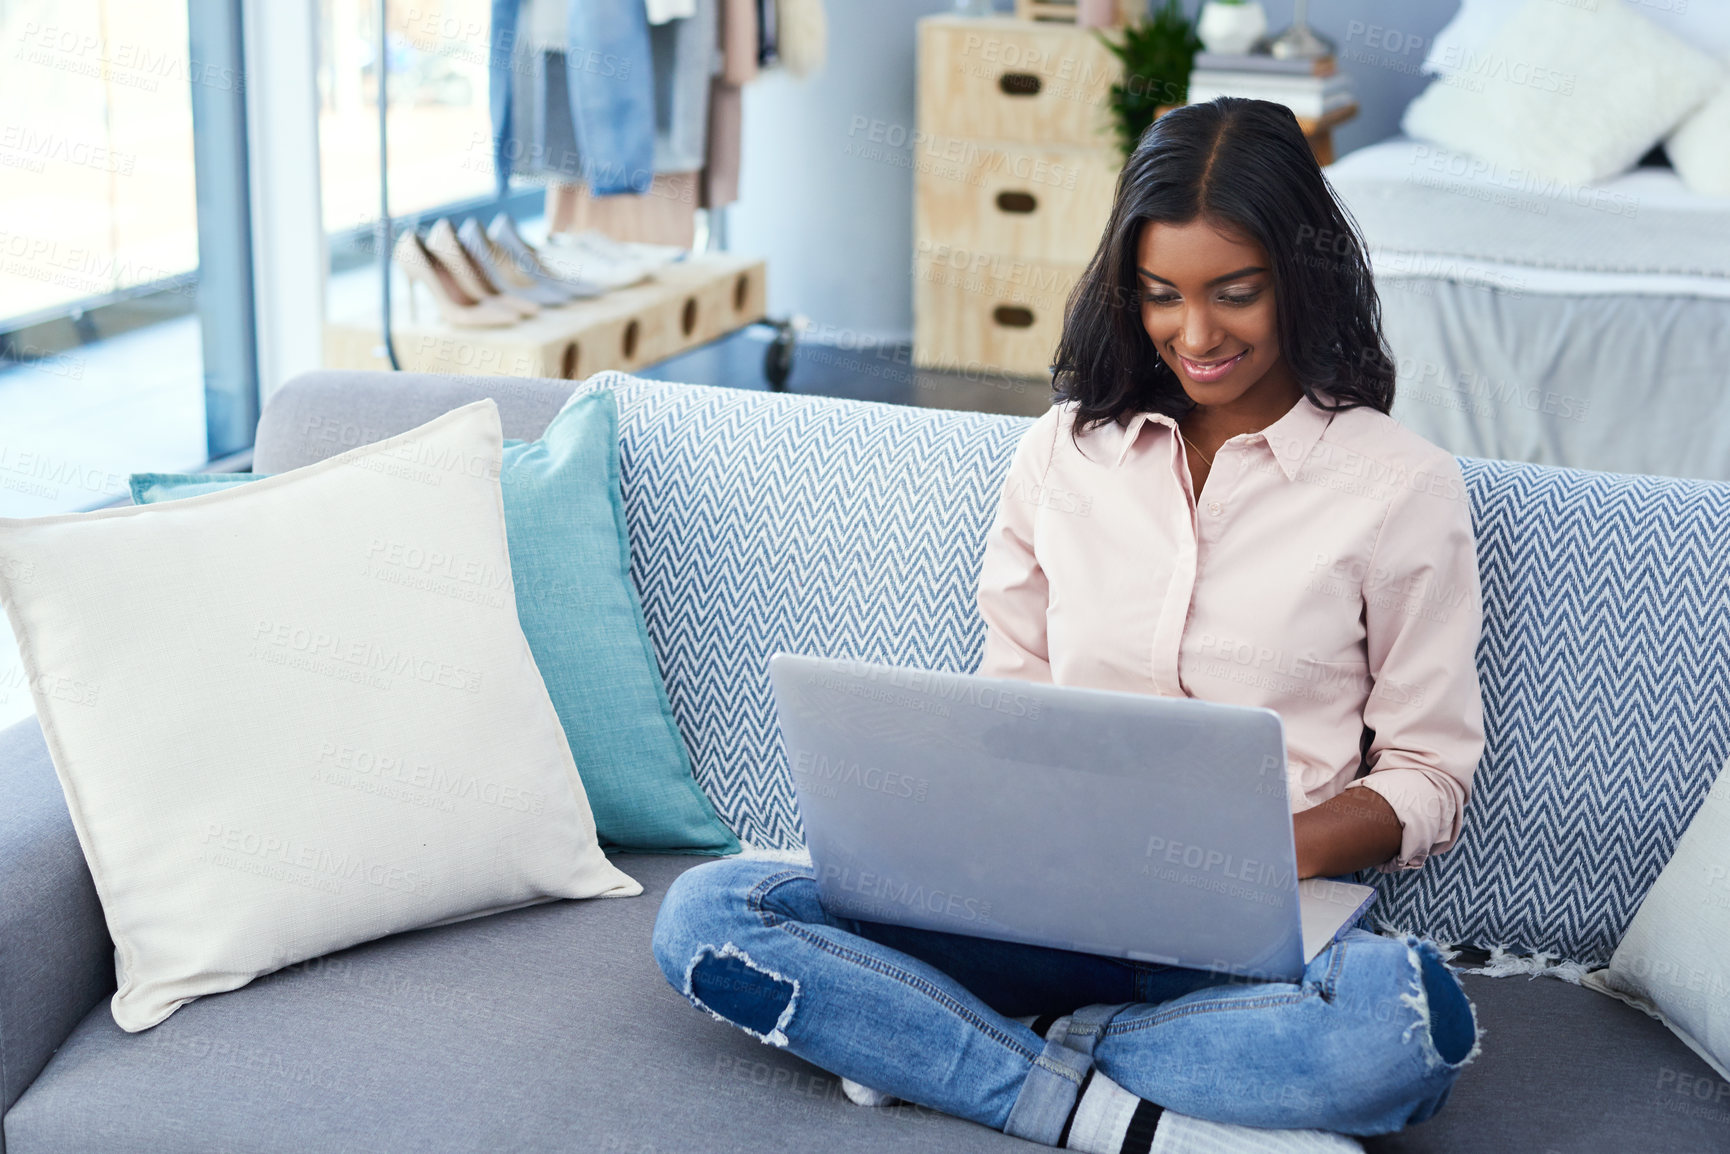 Buy stock photo Shot of an attractive young woman using a laptop while chilling on the sofa in the living room at home